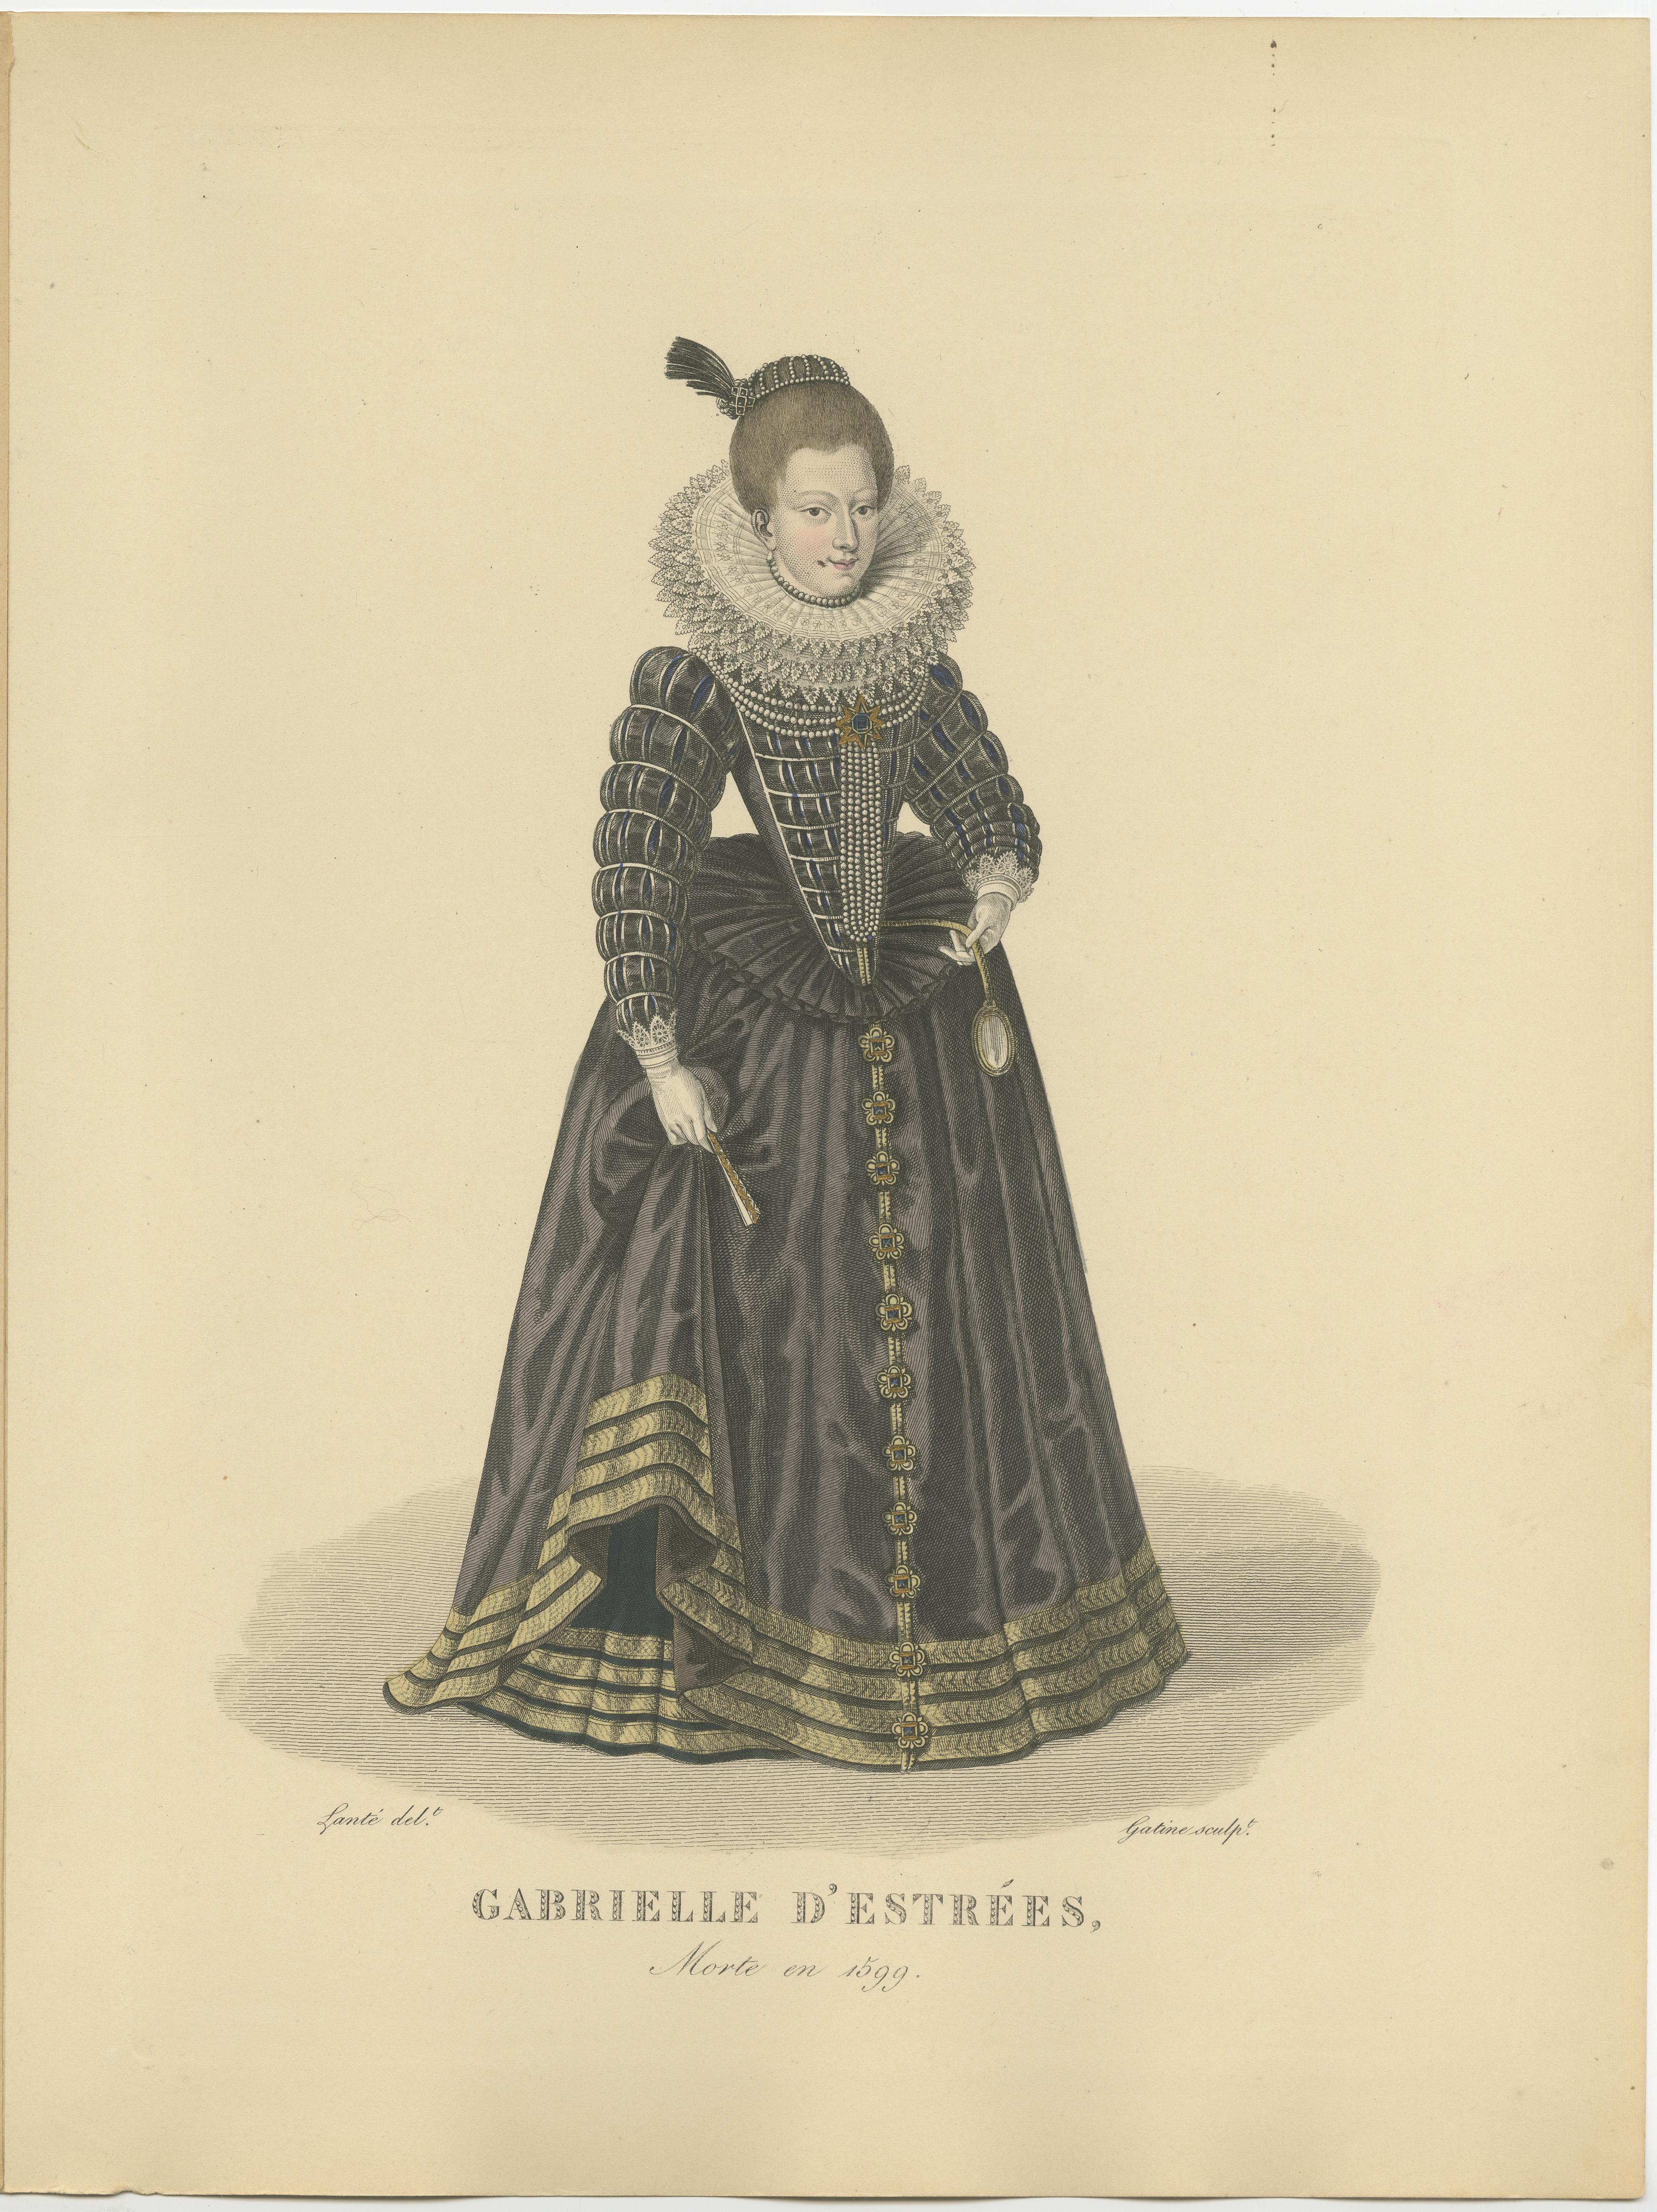 Antique print titled 'GABRIELLE D' ESTREES' Original antique print of Gabrielle d'Estrées, Duchess of Beaufort.

Gabrielle d'Estrées, Duchess of Beaufort and Verneuil, Marchioness of Monceaux was a mistress, confidante and adviser of Henry IV of